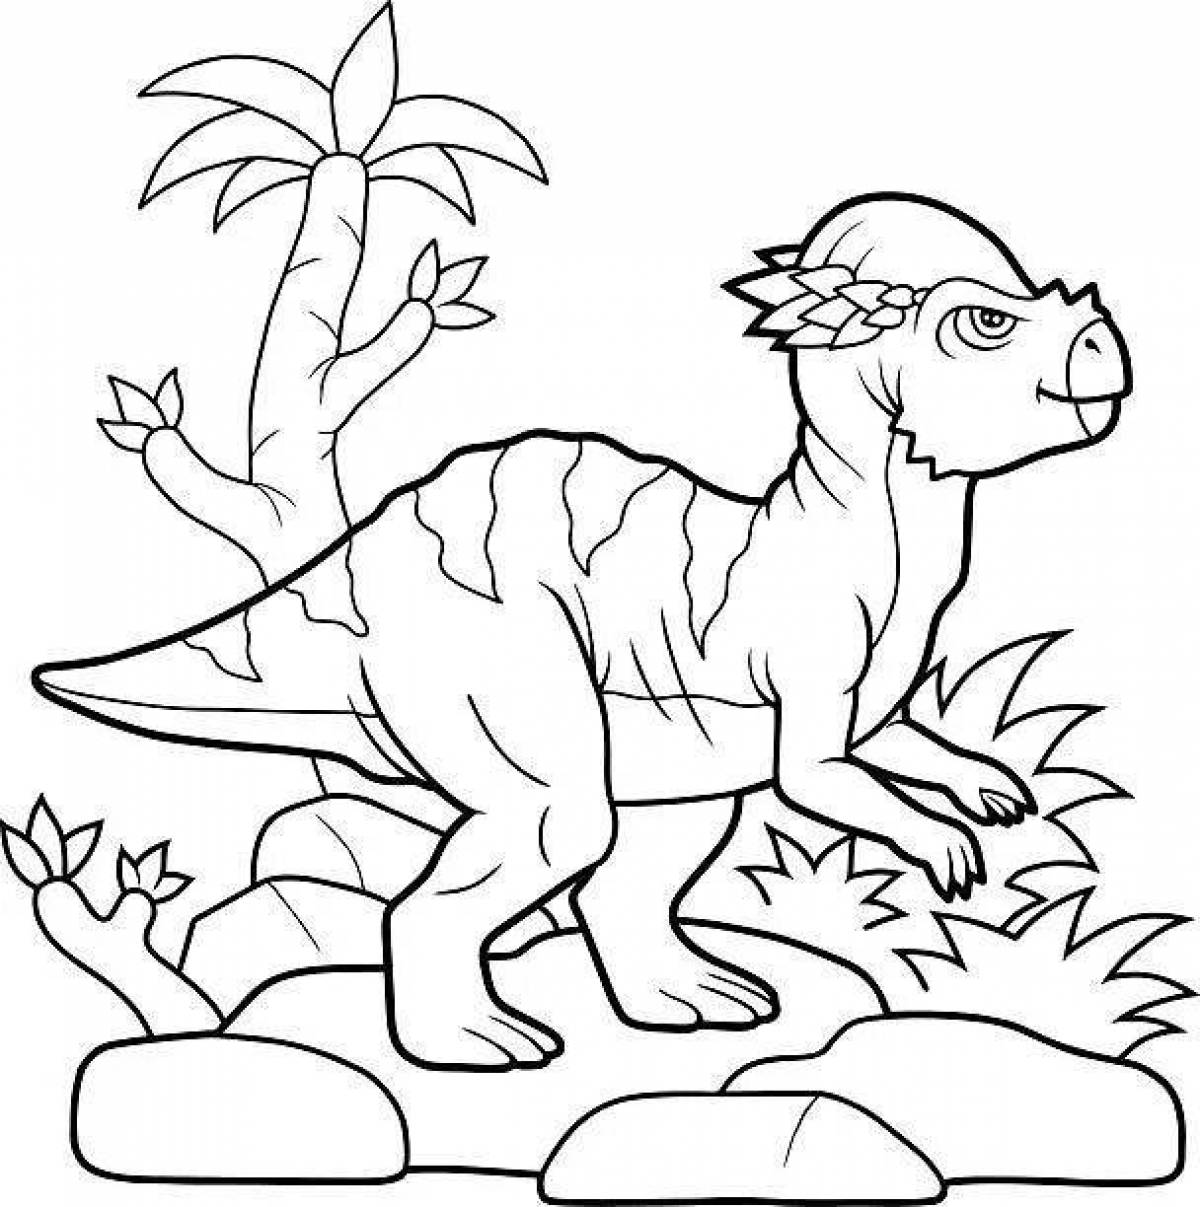 Colorful pachycephalosaurus coloring page